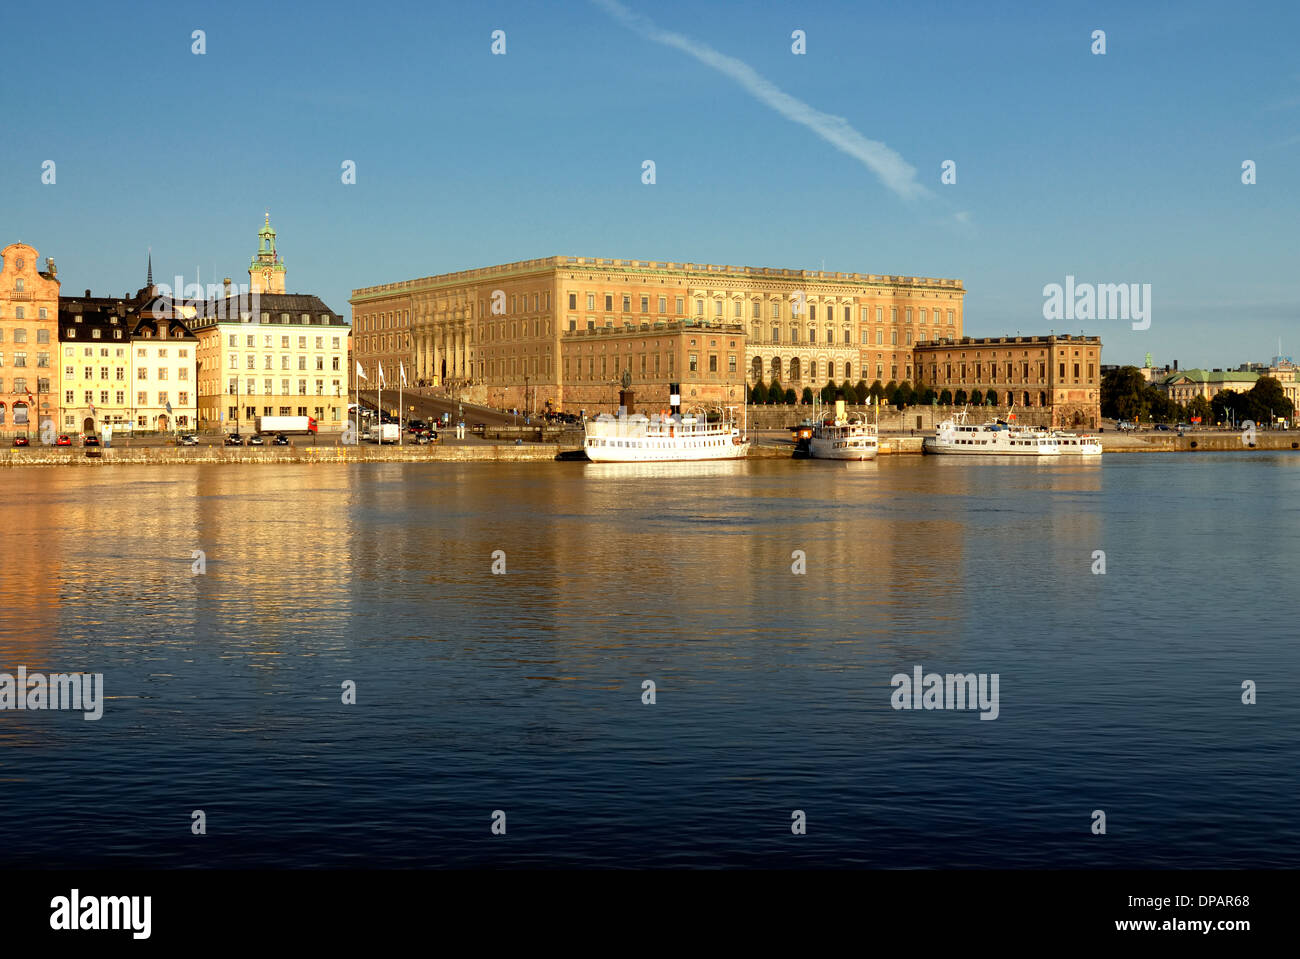 Royal Palace in Stockholm, Sweden. Stock Photo